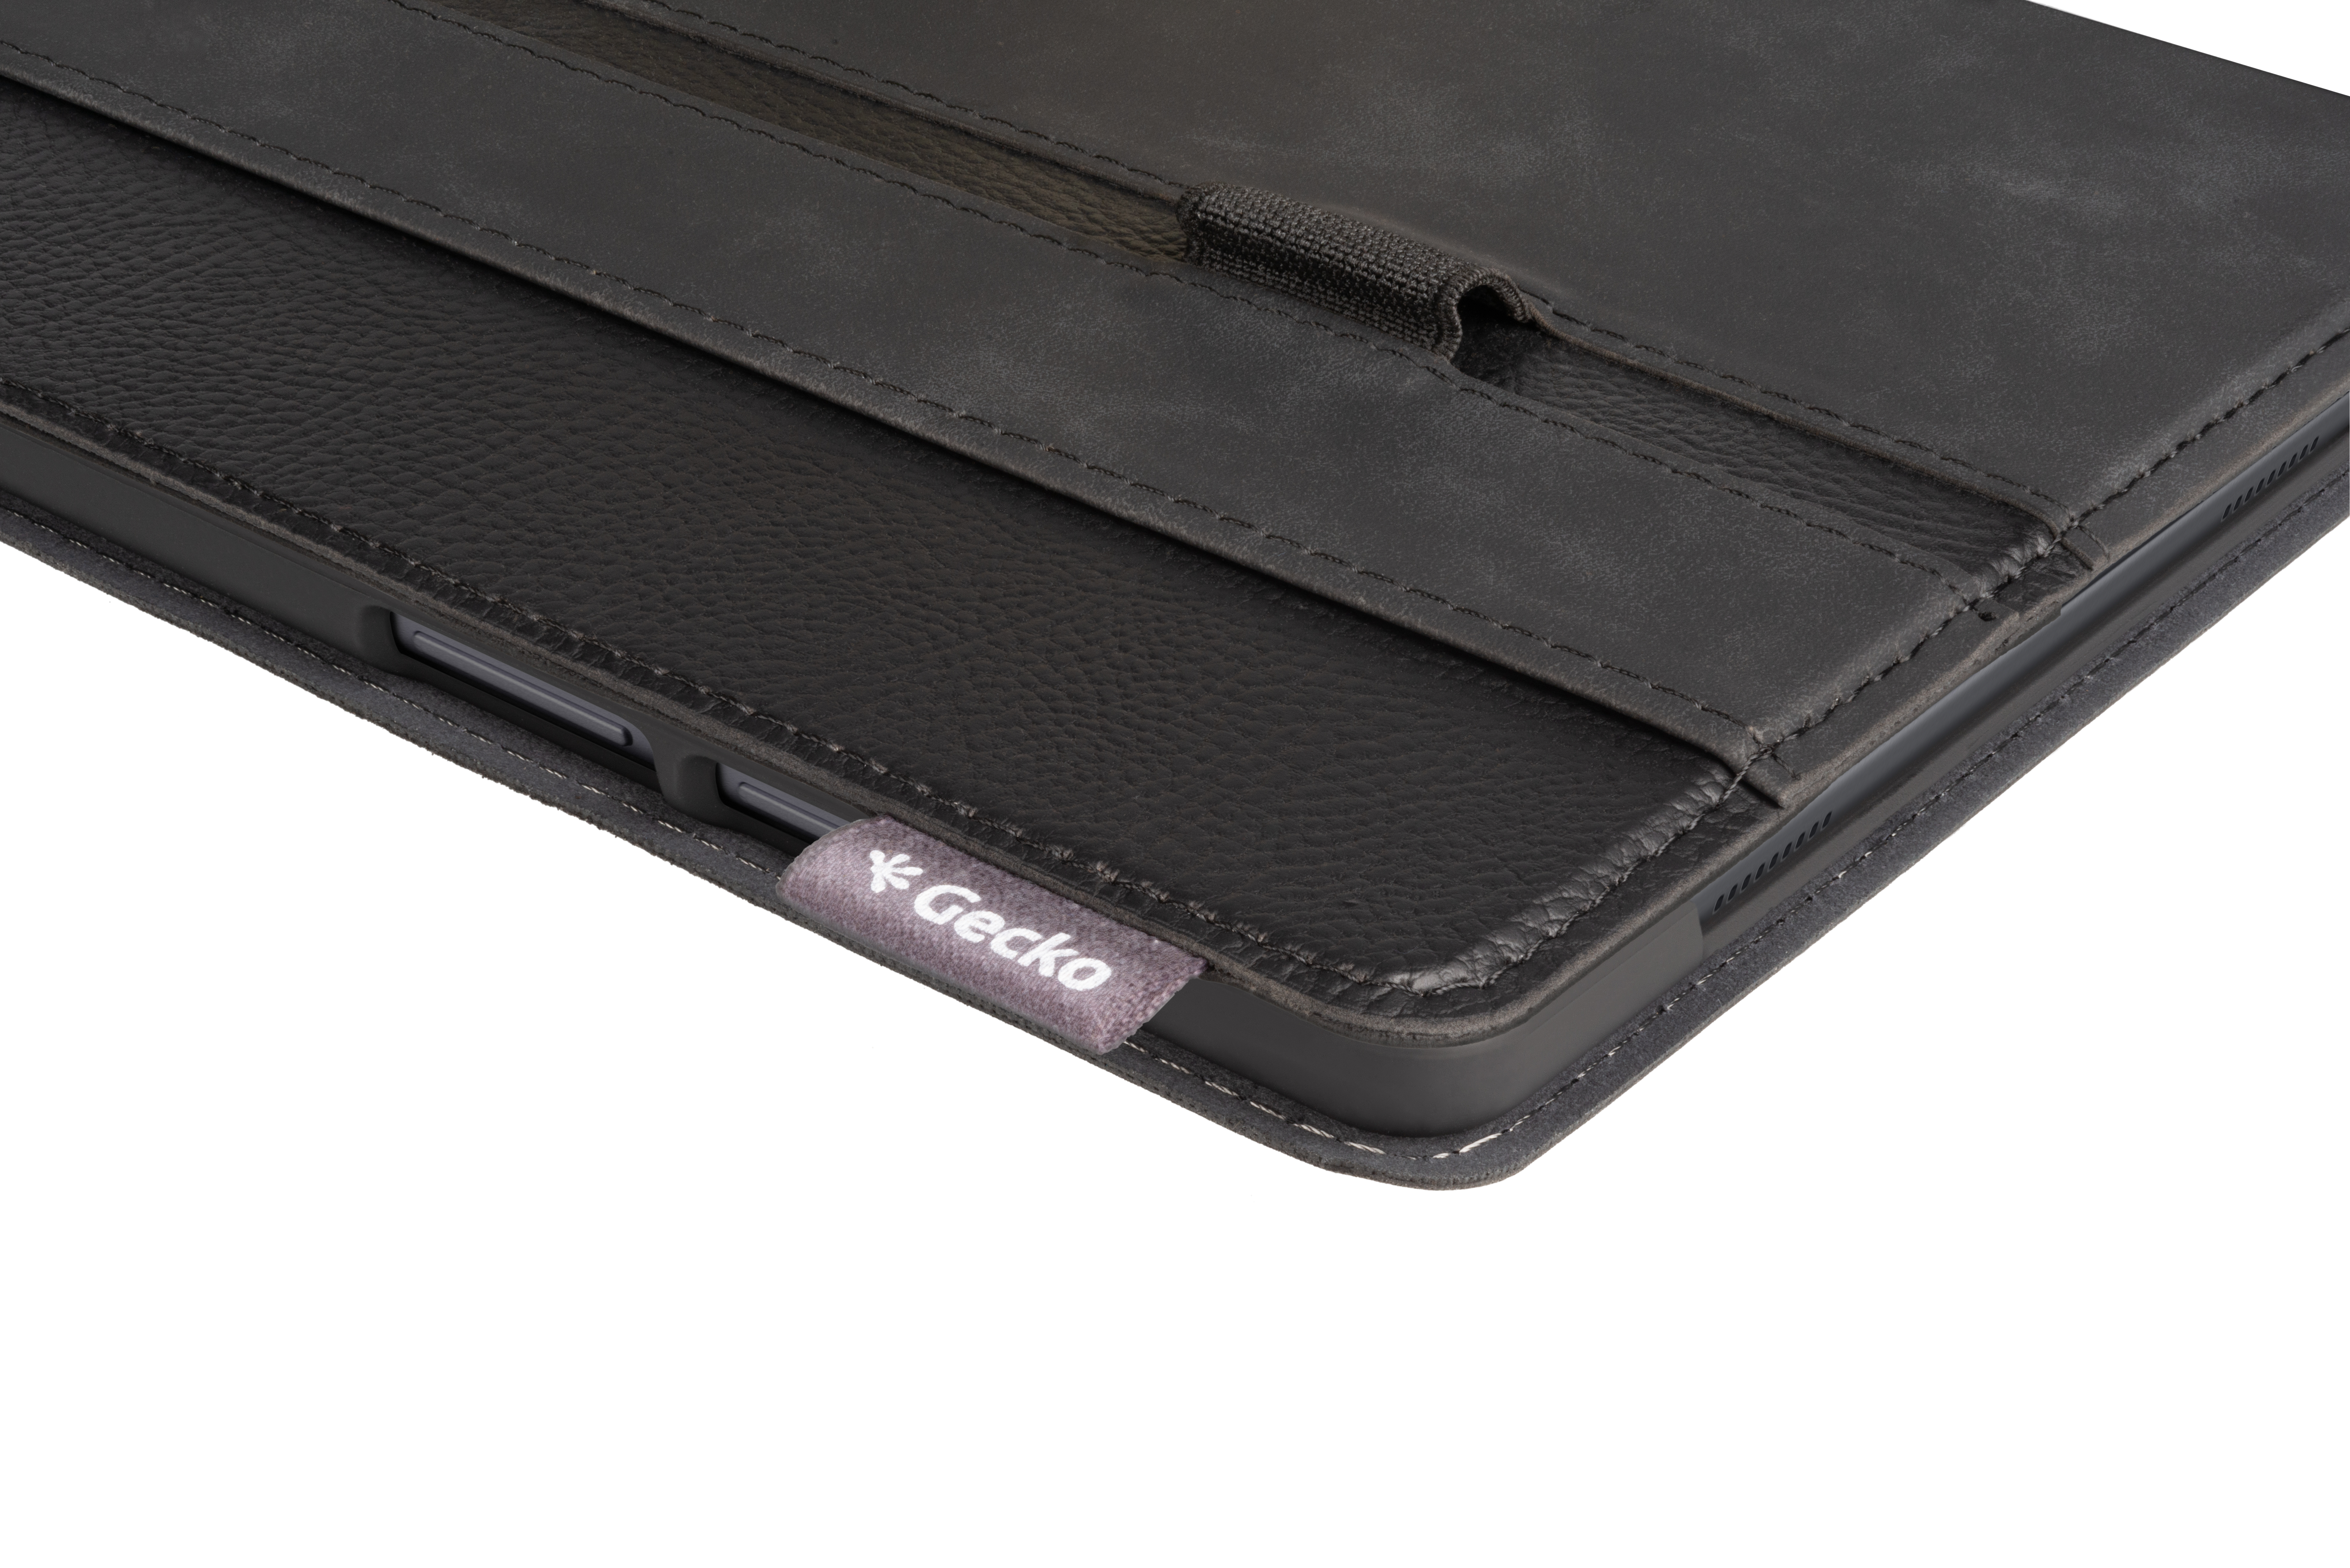 (2020) Tablet Galaxy Bookcover COVERS für Schwarz Leather, Tab A7 10.4 Samsung Hülle Cover GECKO PU Business